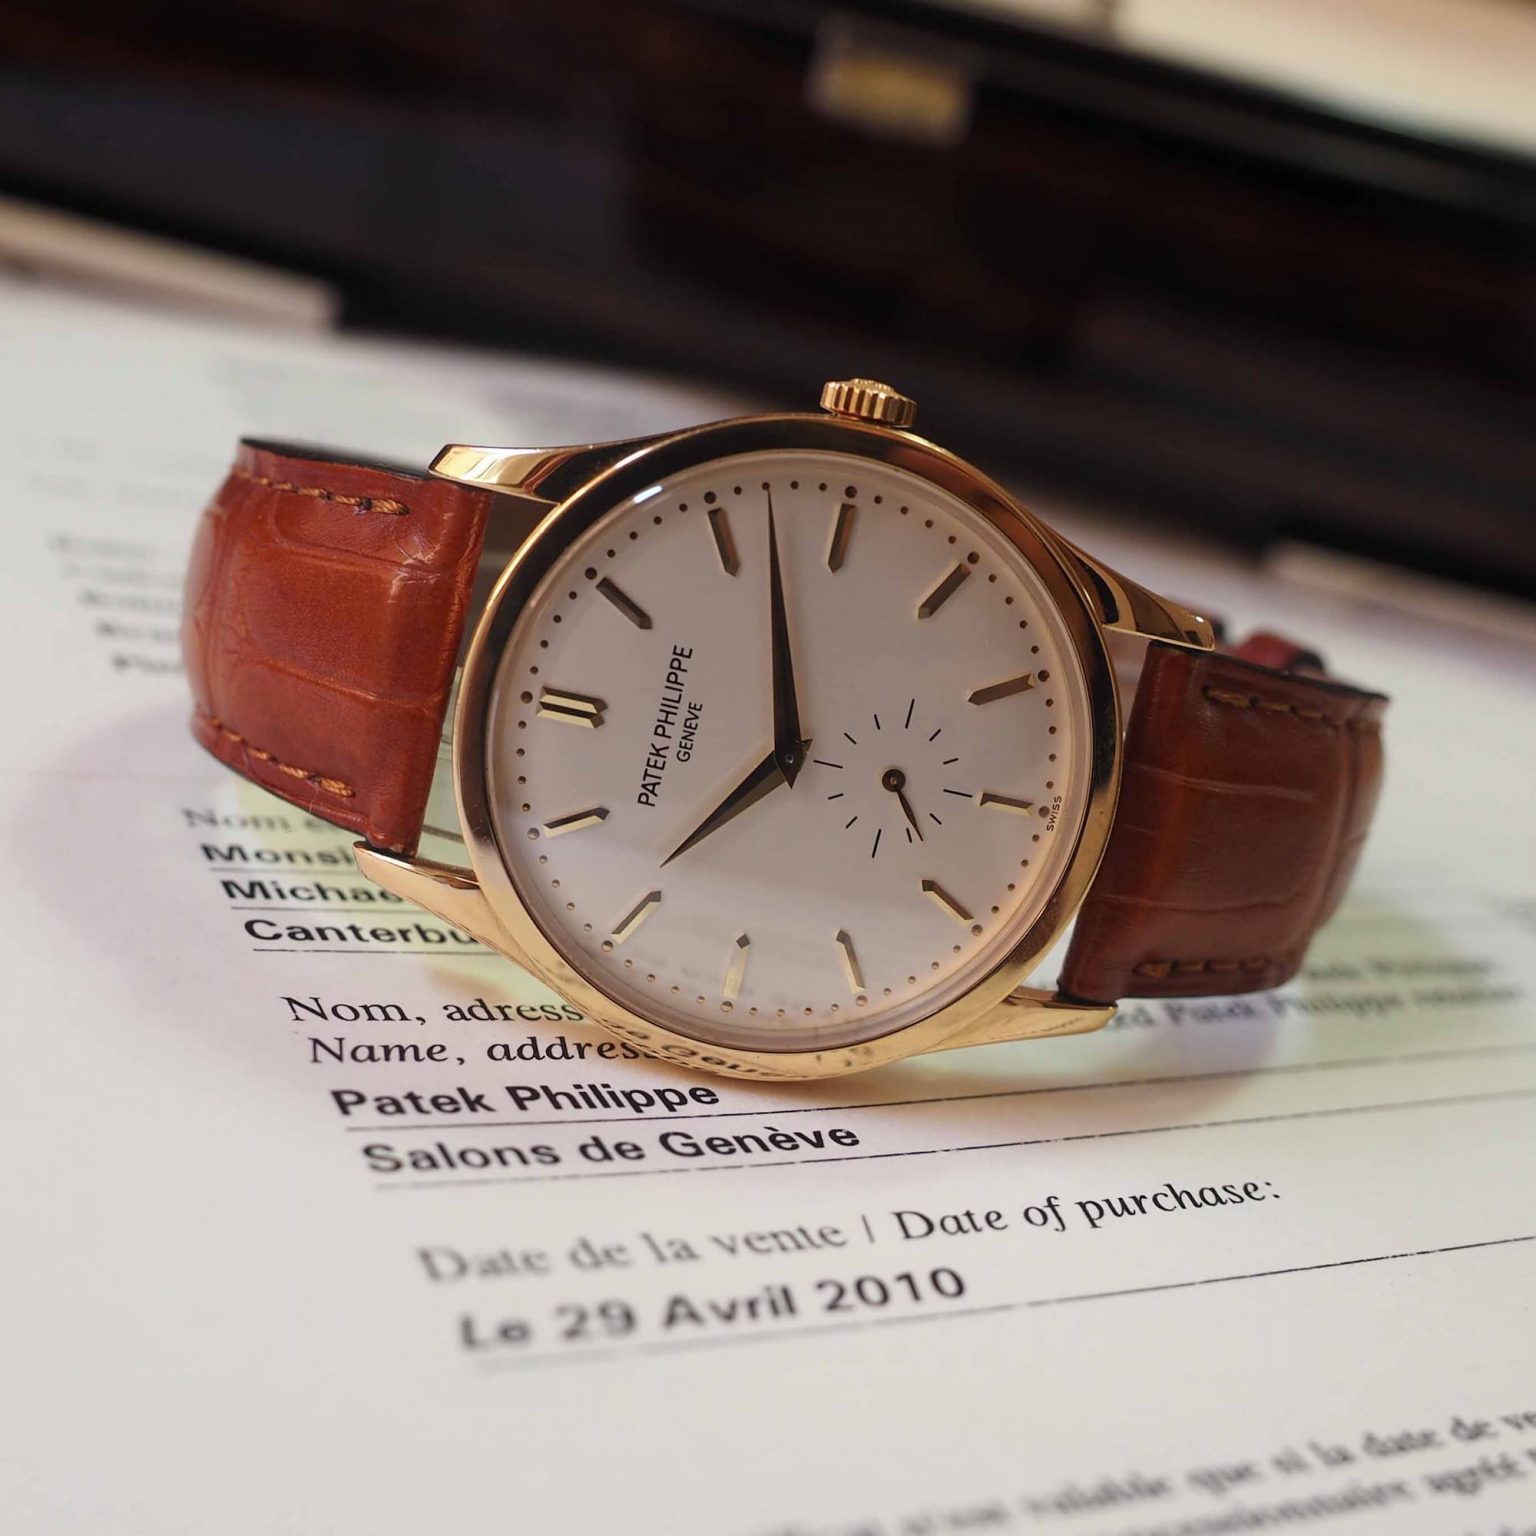 Patek Philippe Archives - Watch Out